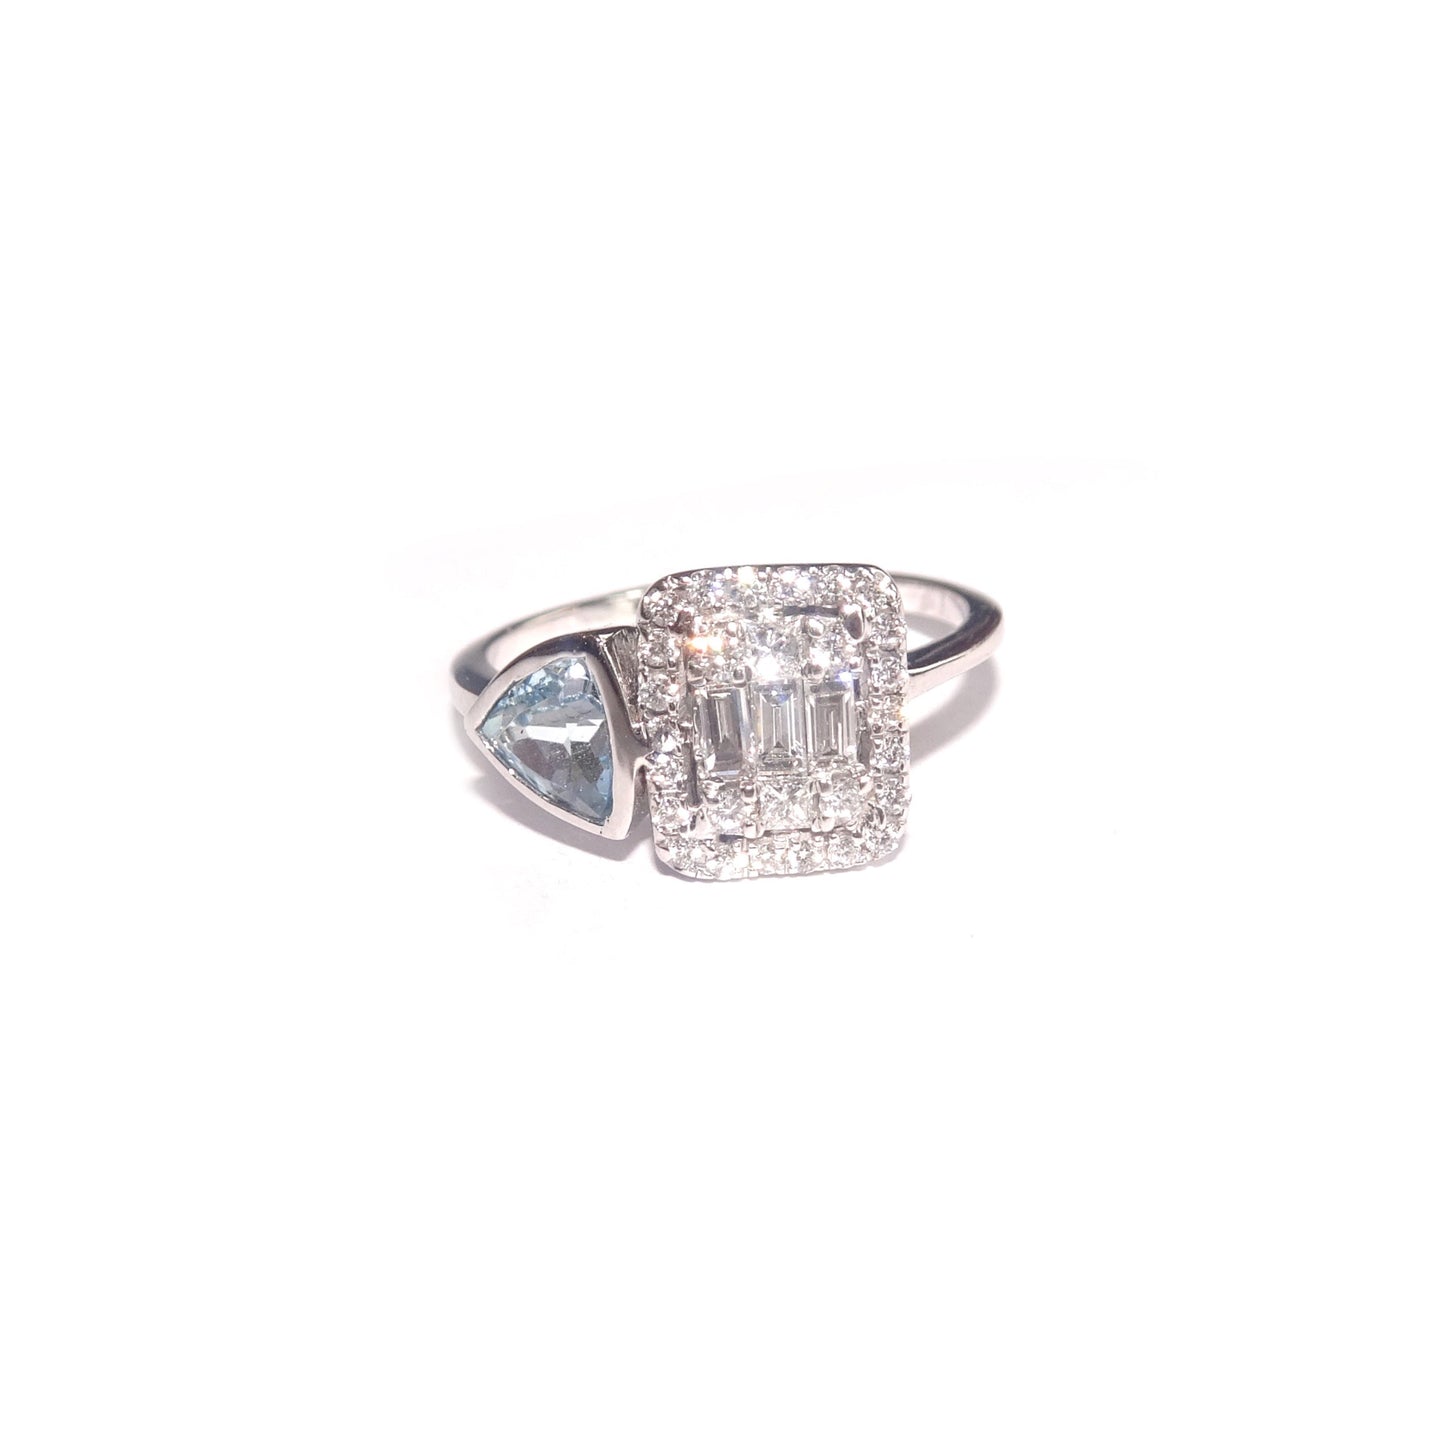 Surrounding the diamond is a beautiful trillion-cut topaz, which is a brilliant blue gemstone that complements the diamond and adds a pop of color to the ring. 